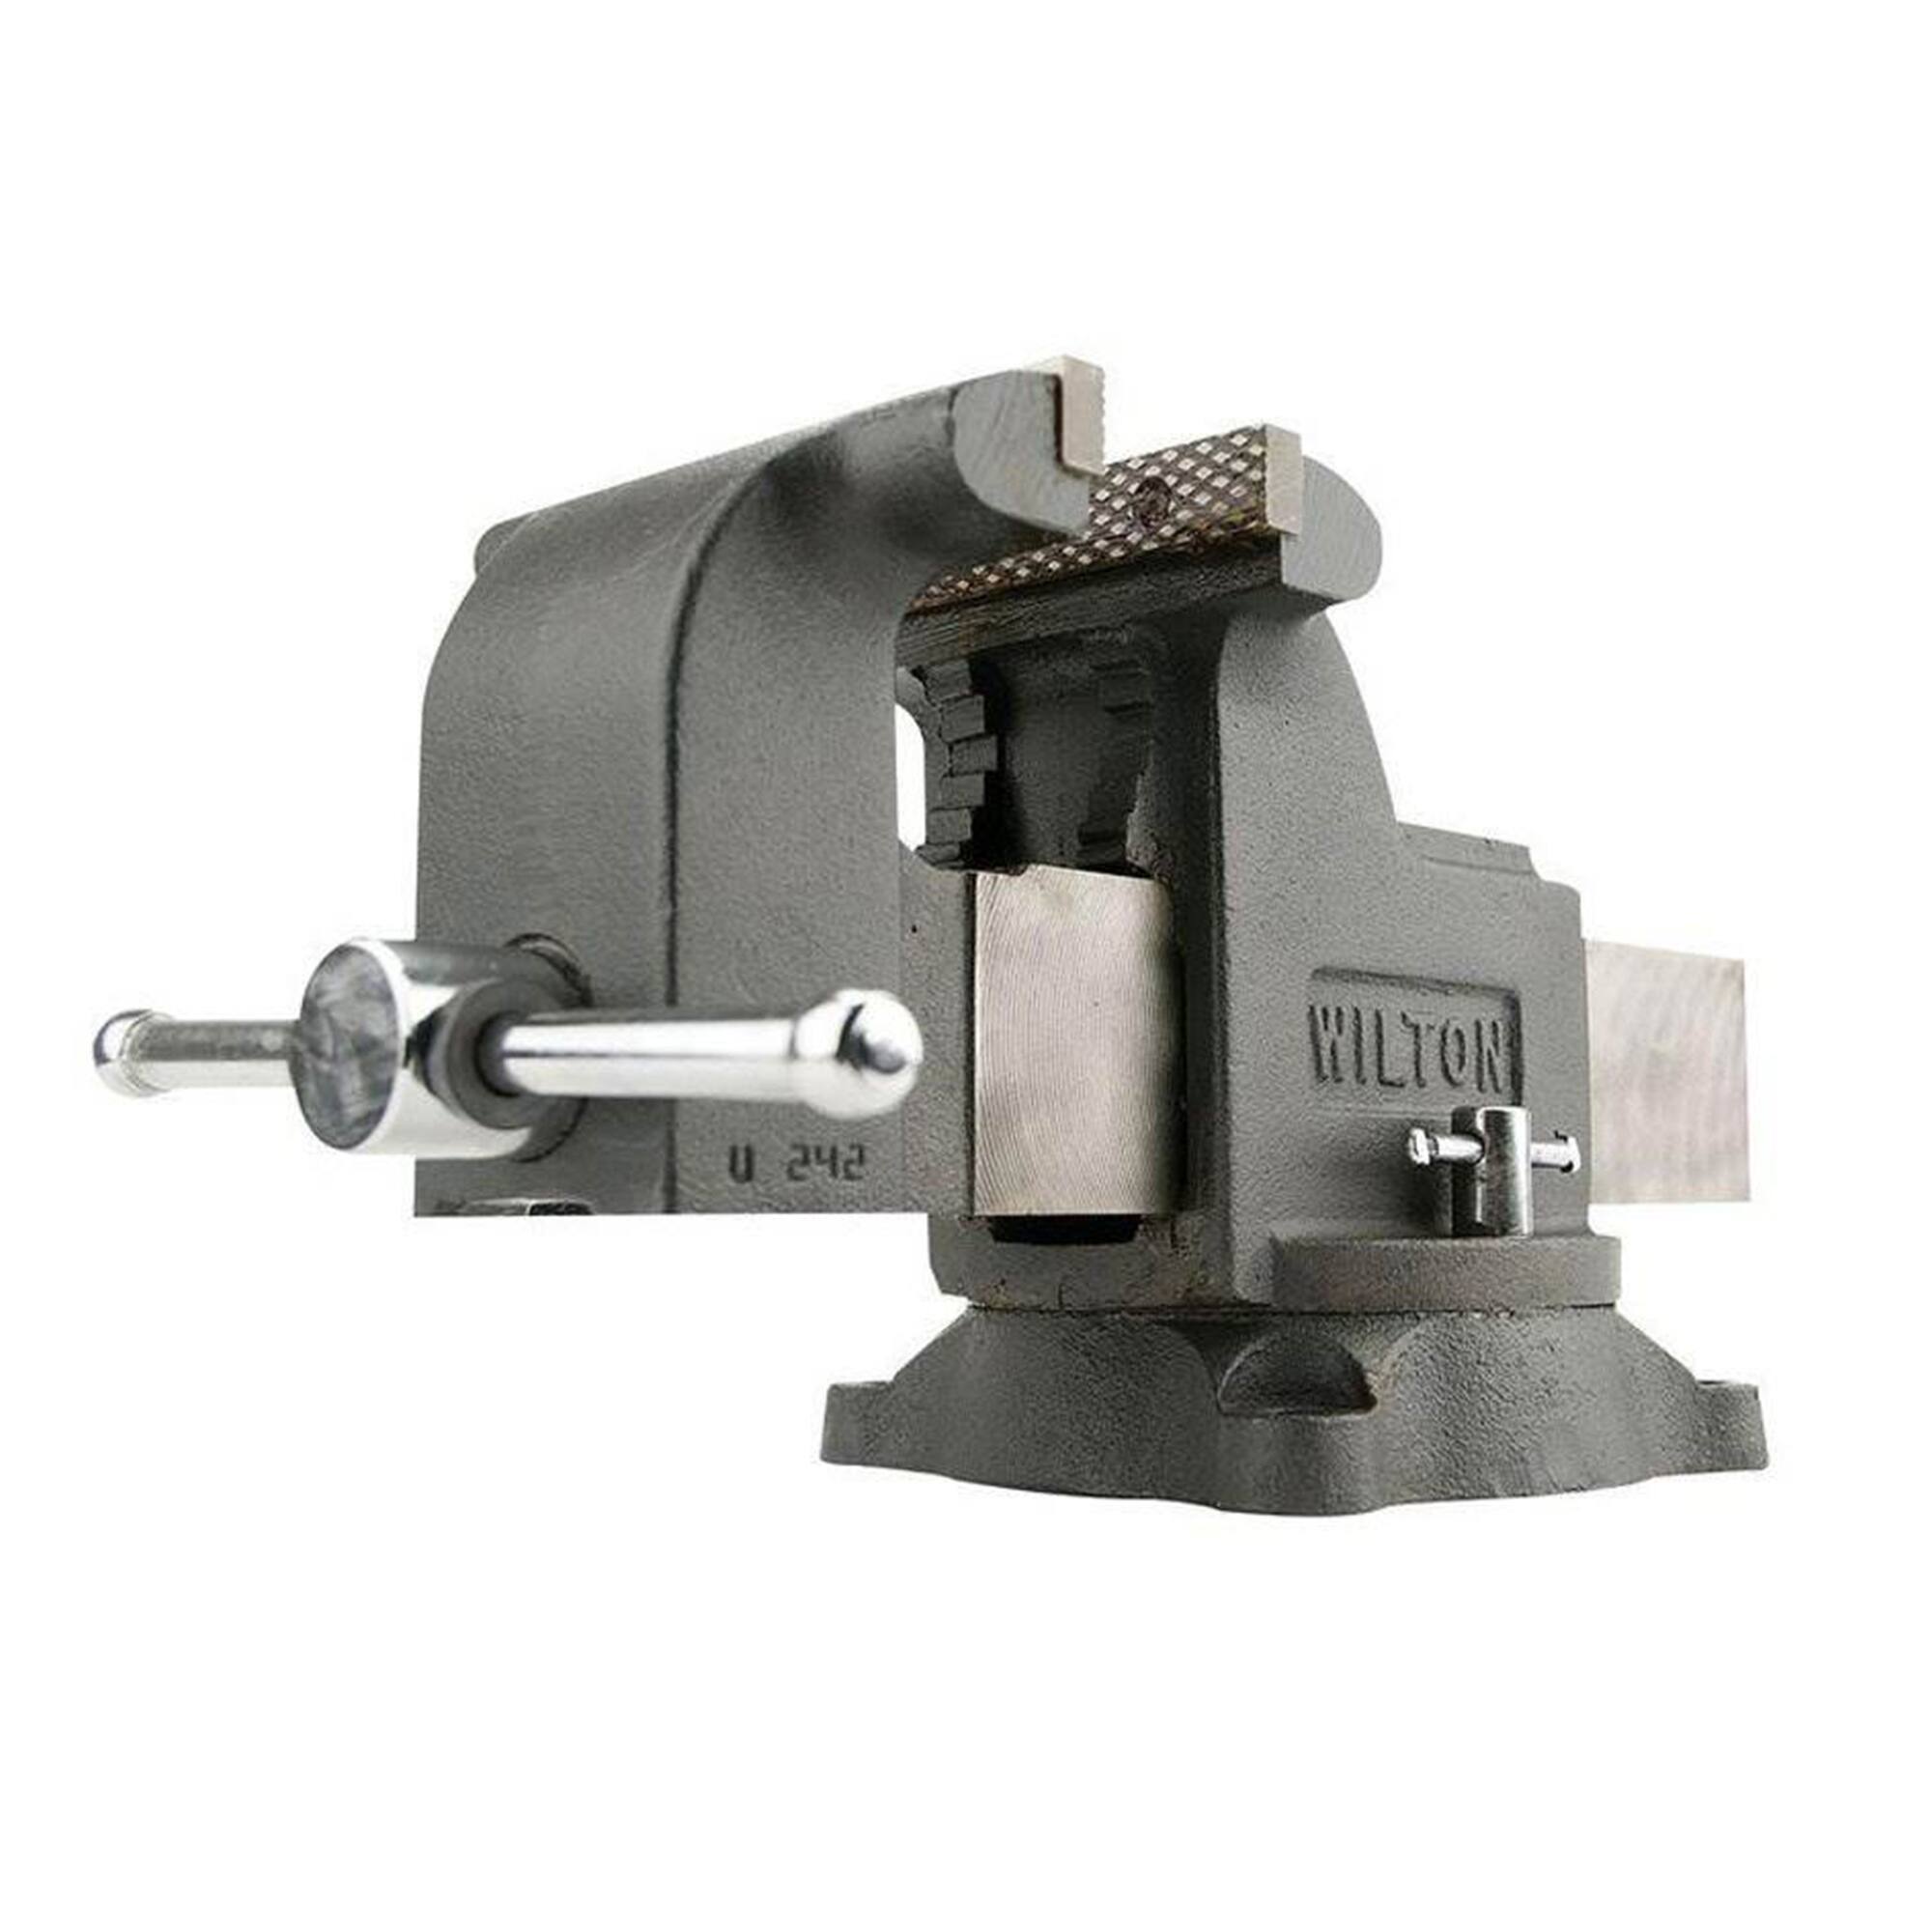 Wilton WS6 Work Shop Bench Vise w/ 6in Jaw, 3.5in Throat and Steel Swivel Base - 42